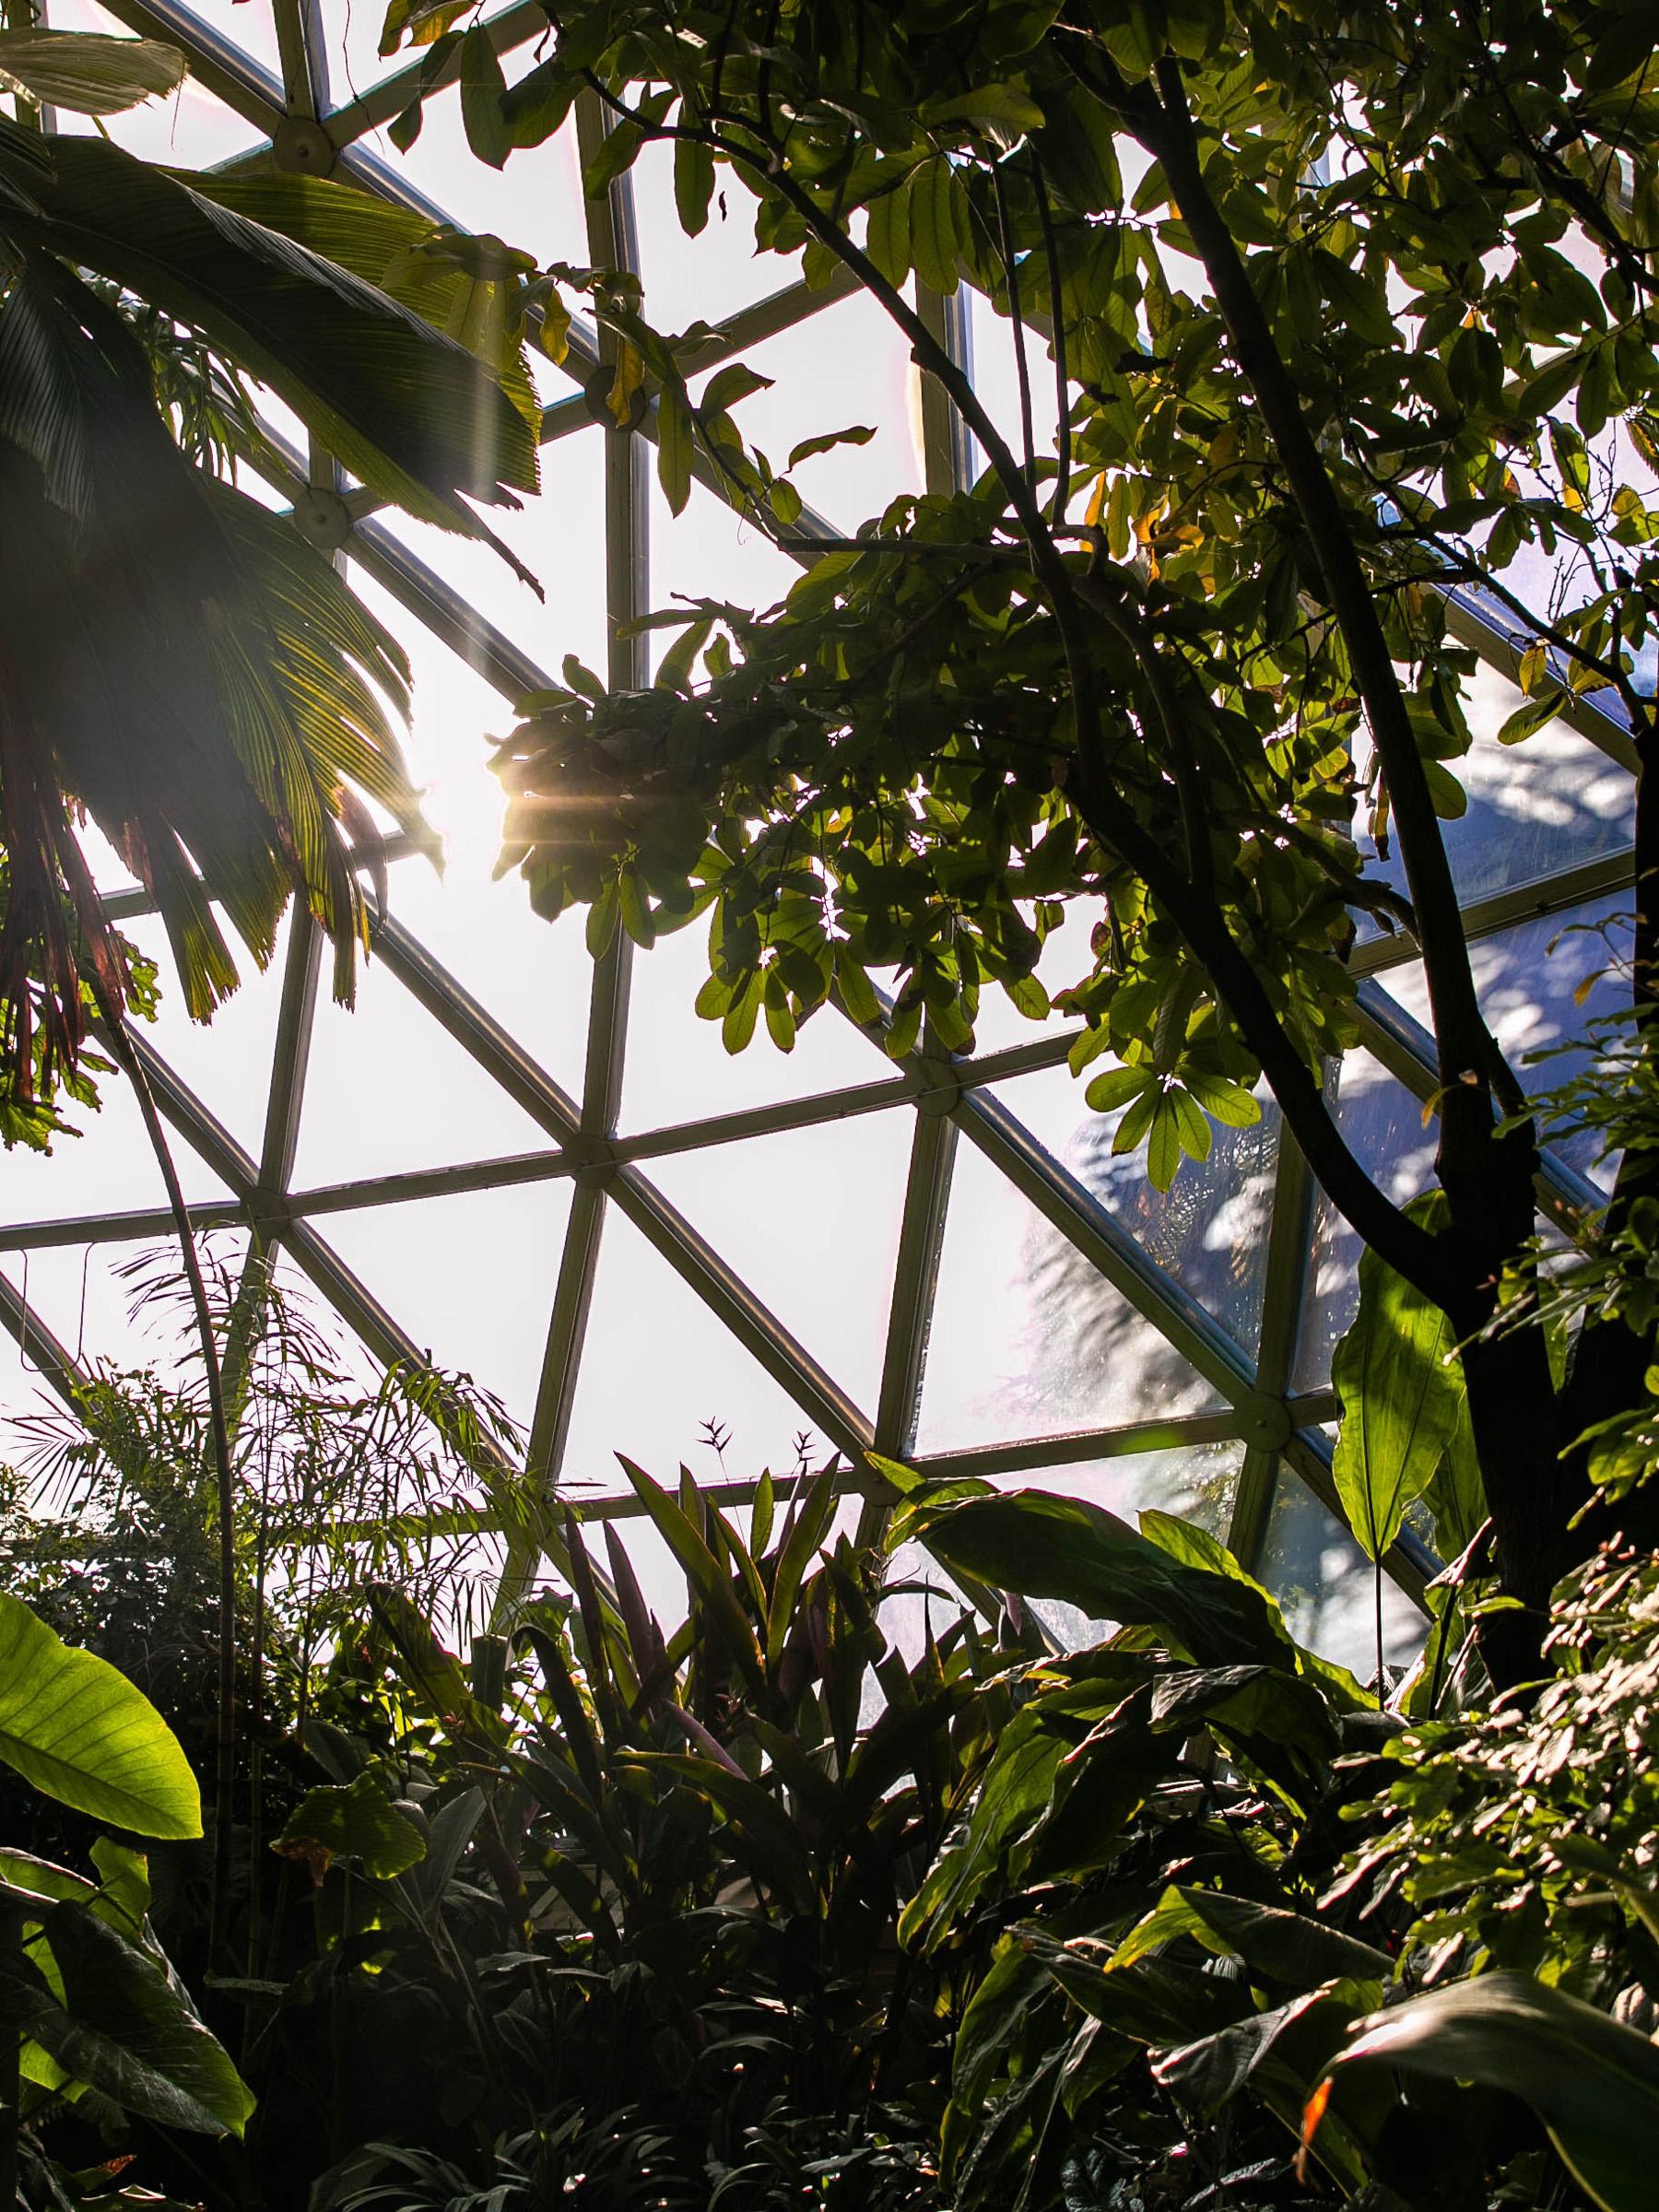 Light shining through glass windows of large greenhouse dome with lush tropical plants inside